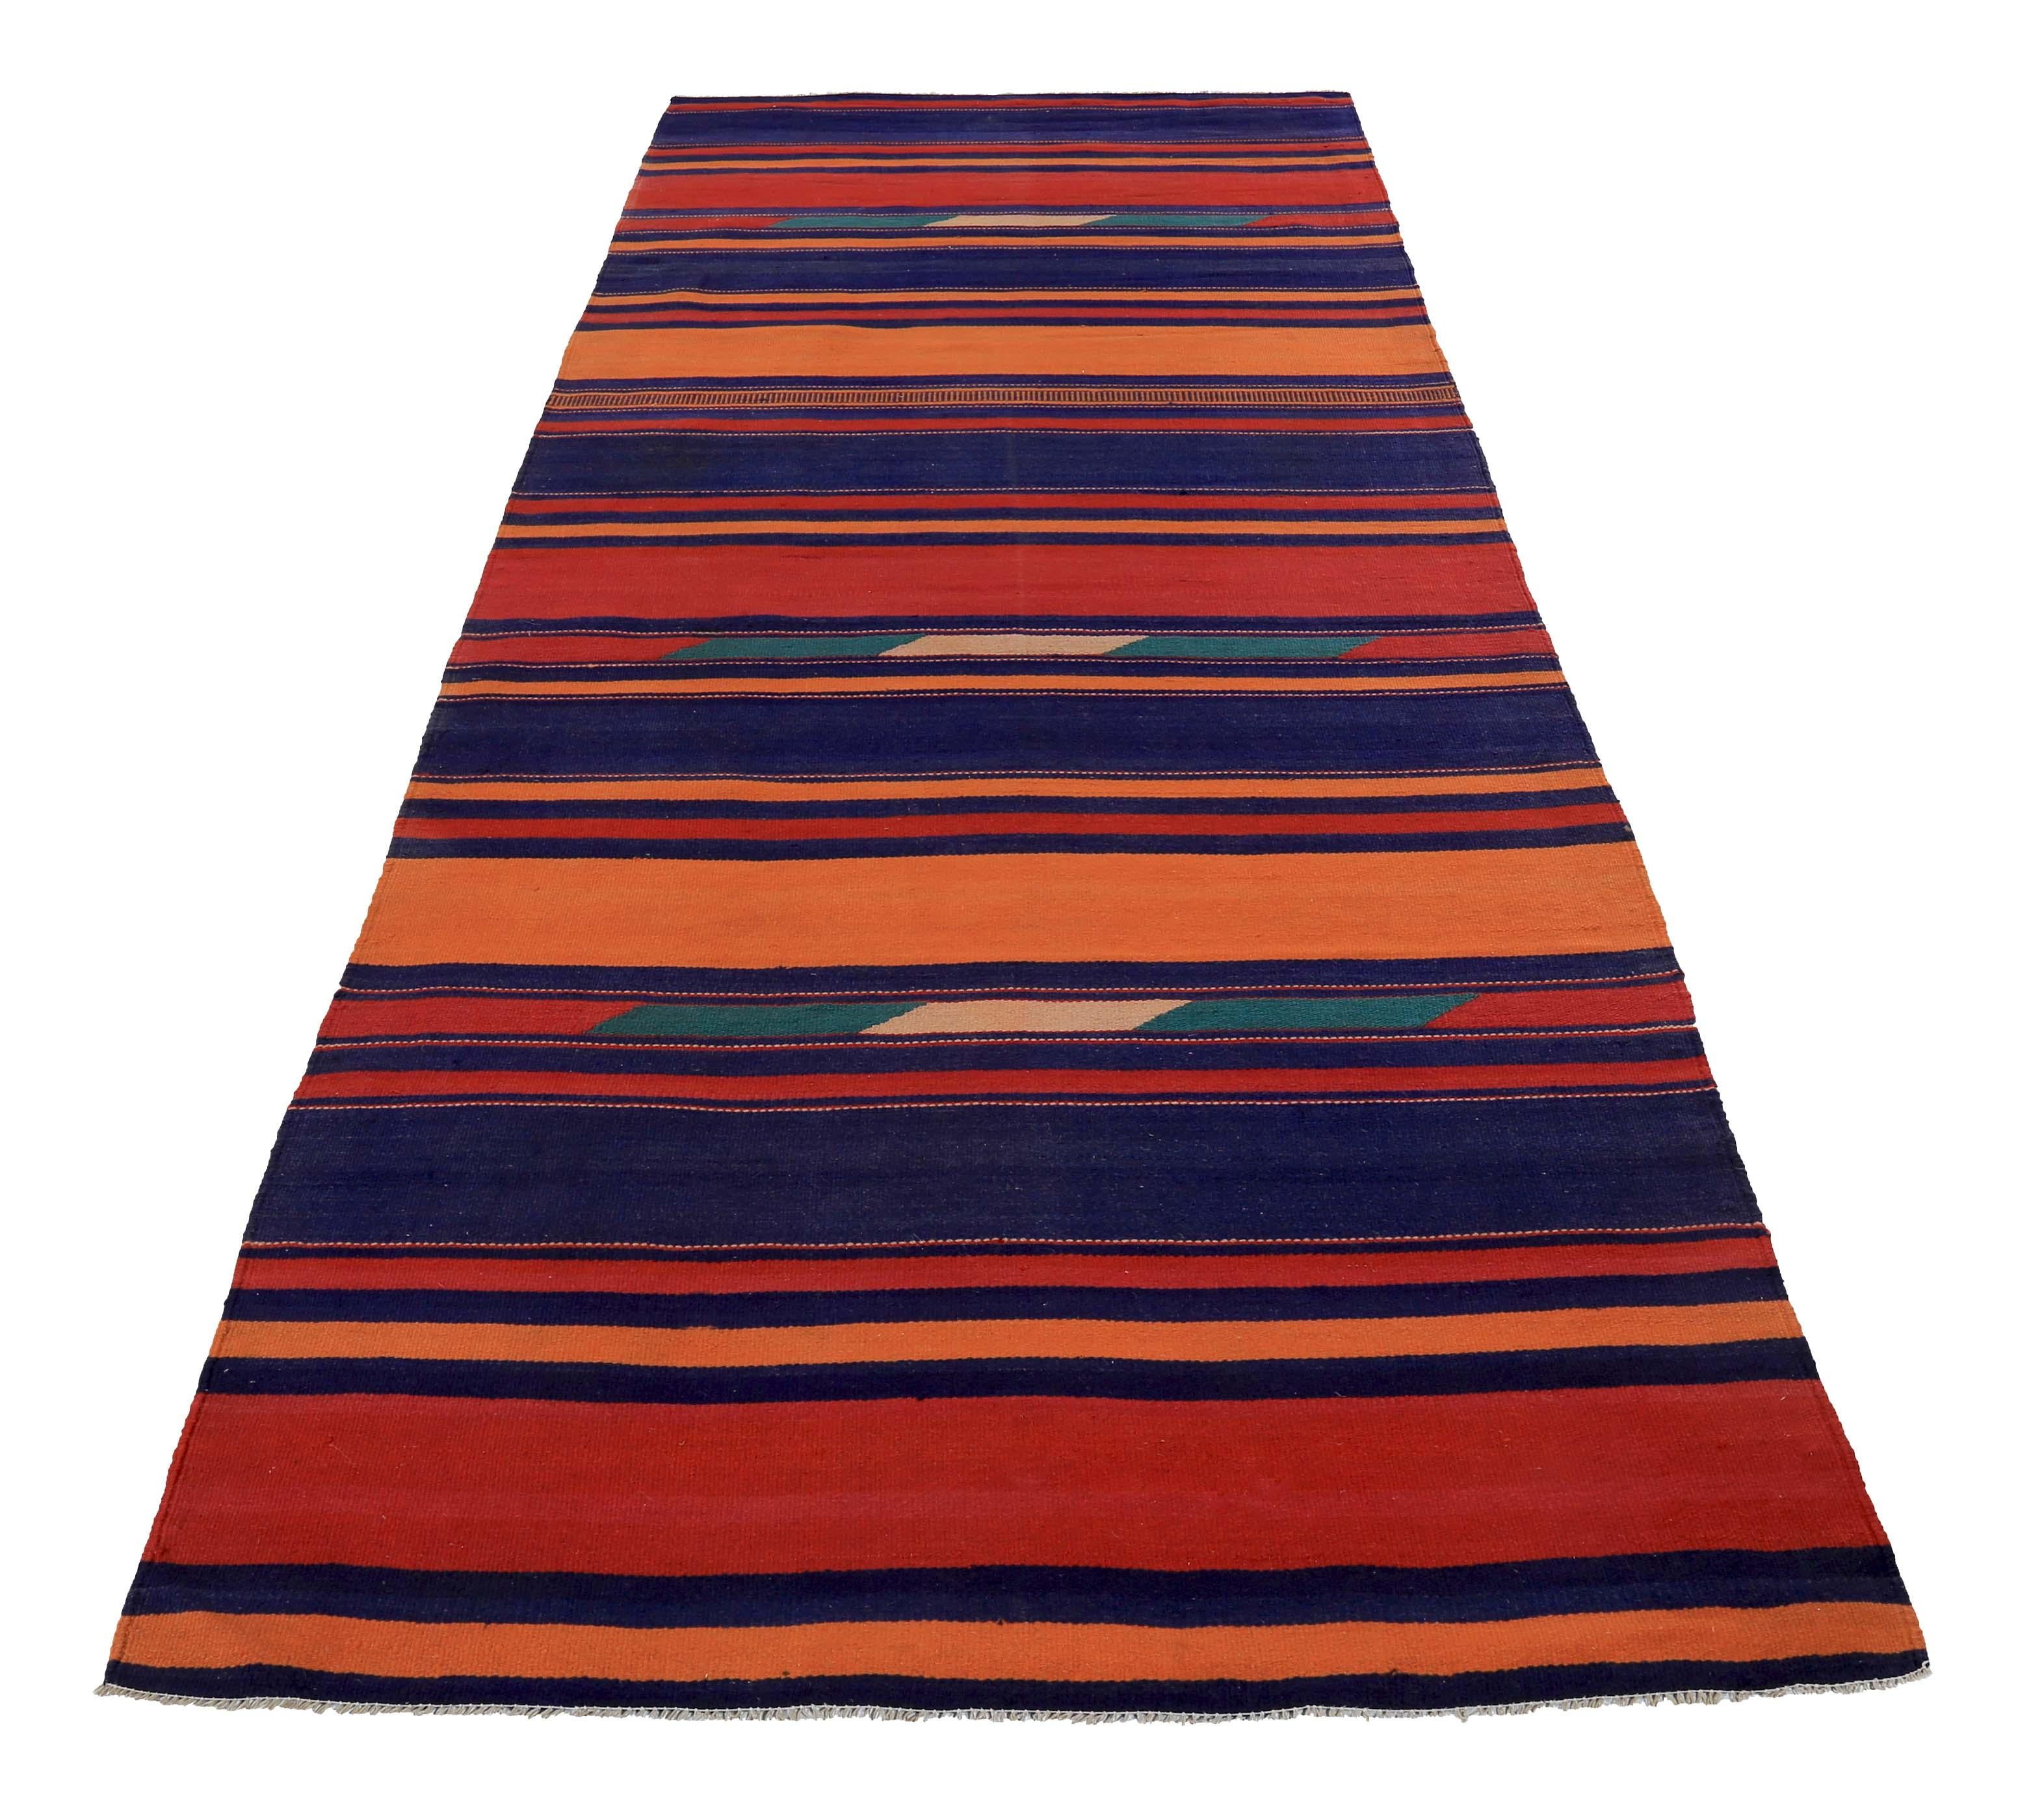 Turkish rug handwoven from the finest sheep’s wool and colored with all-natural vegetable dyes that are safe for humans and pets. It’s a traditional Kilim flat-weave design featuring blue and orange stripes mixed with some green and red hues. It’s a